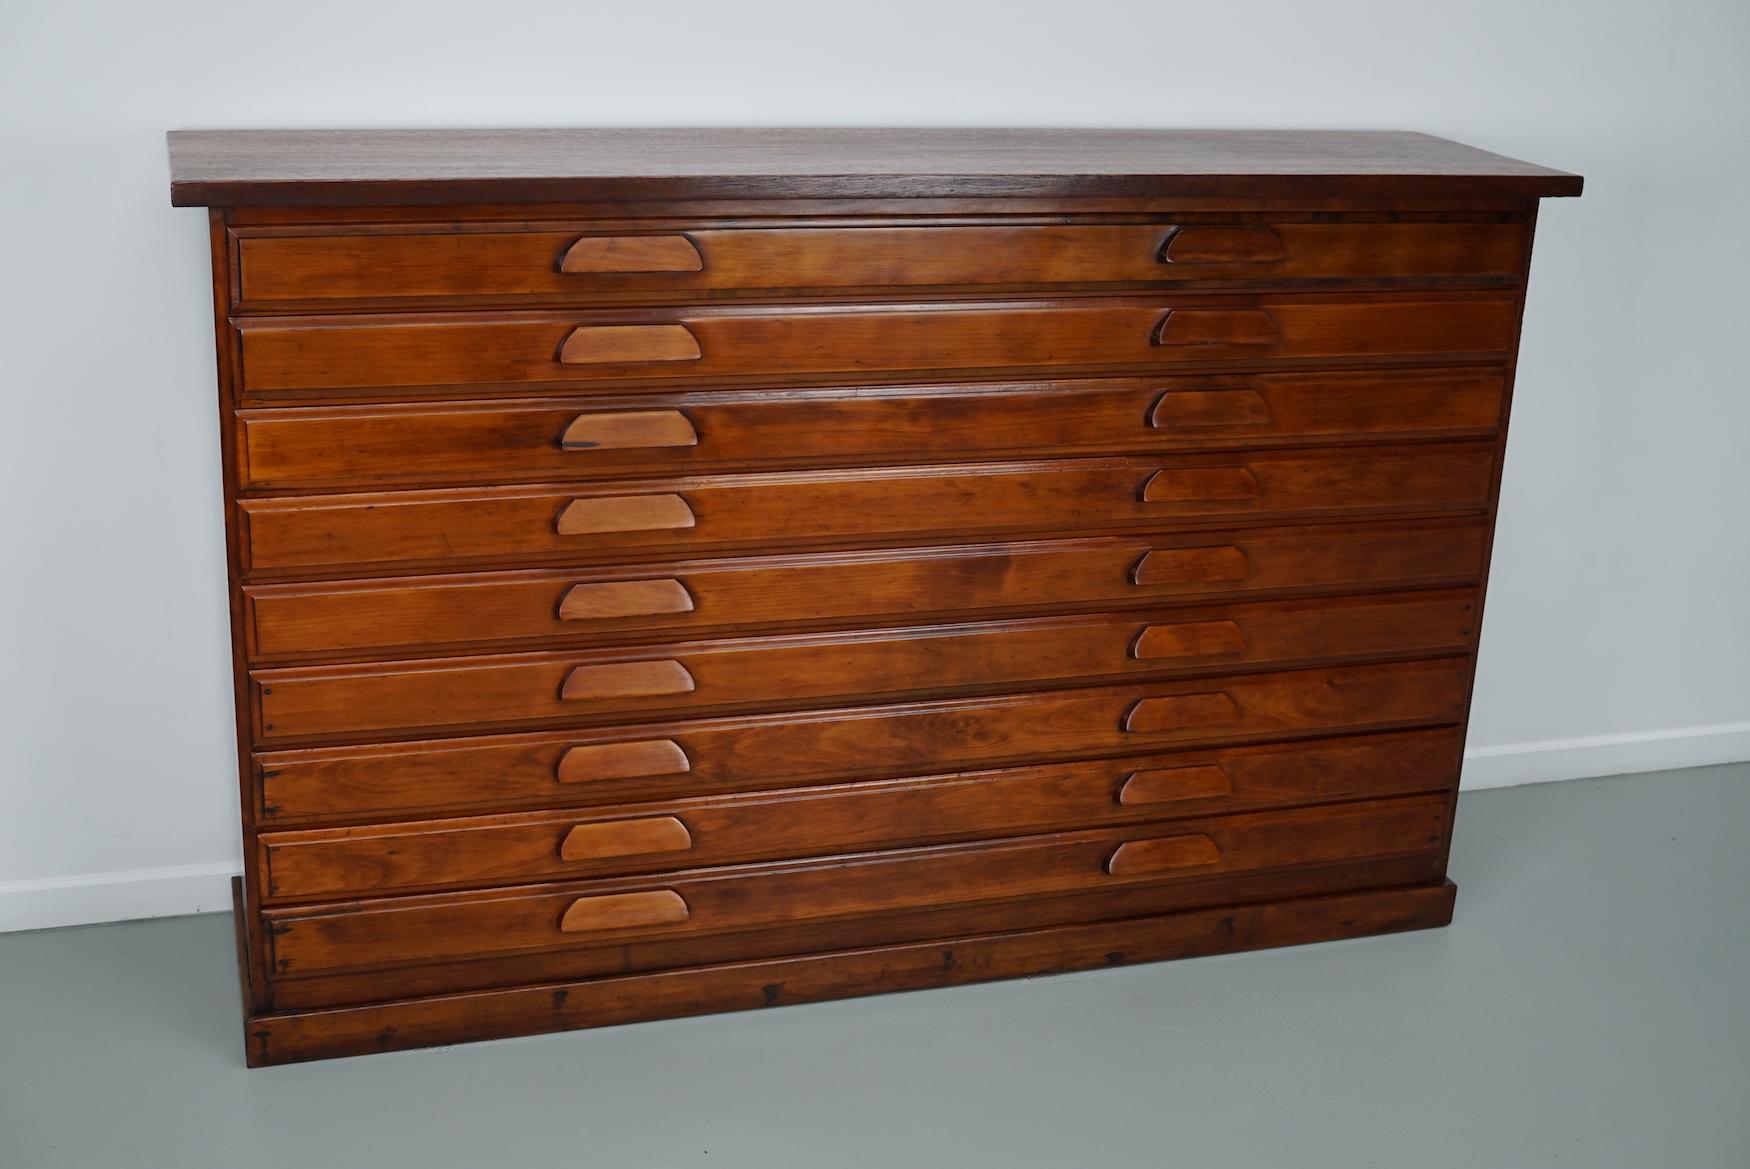 This cabinet was produced during the 1950s in The Netherlands. It features 9 large sized drawers. The interior dimensions of the drawers are: D W H 33 x 160 x 6 cm. It was used in a Catholic church as a chasuble cabinet.